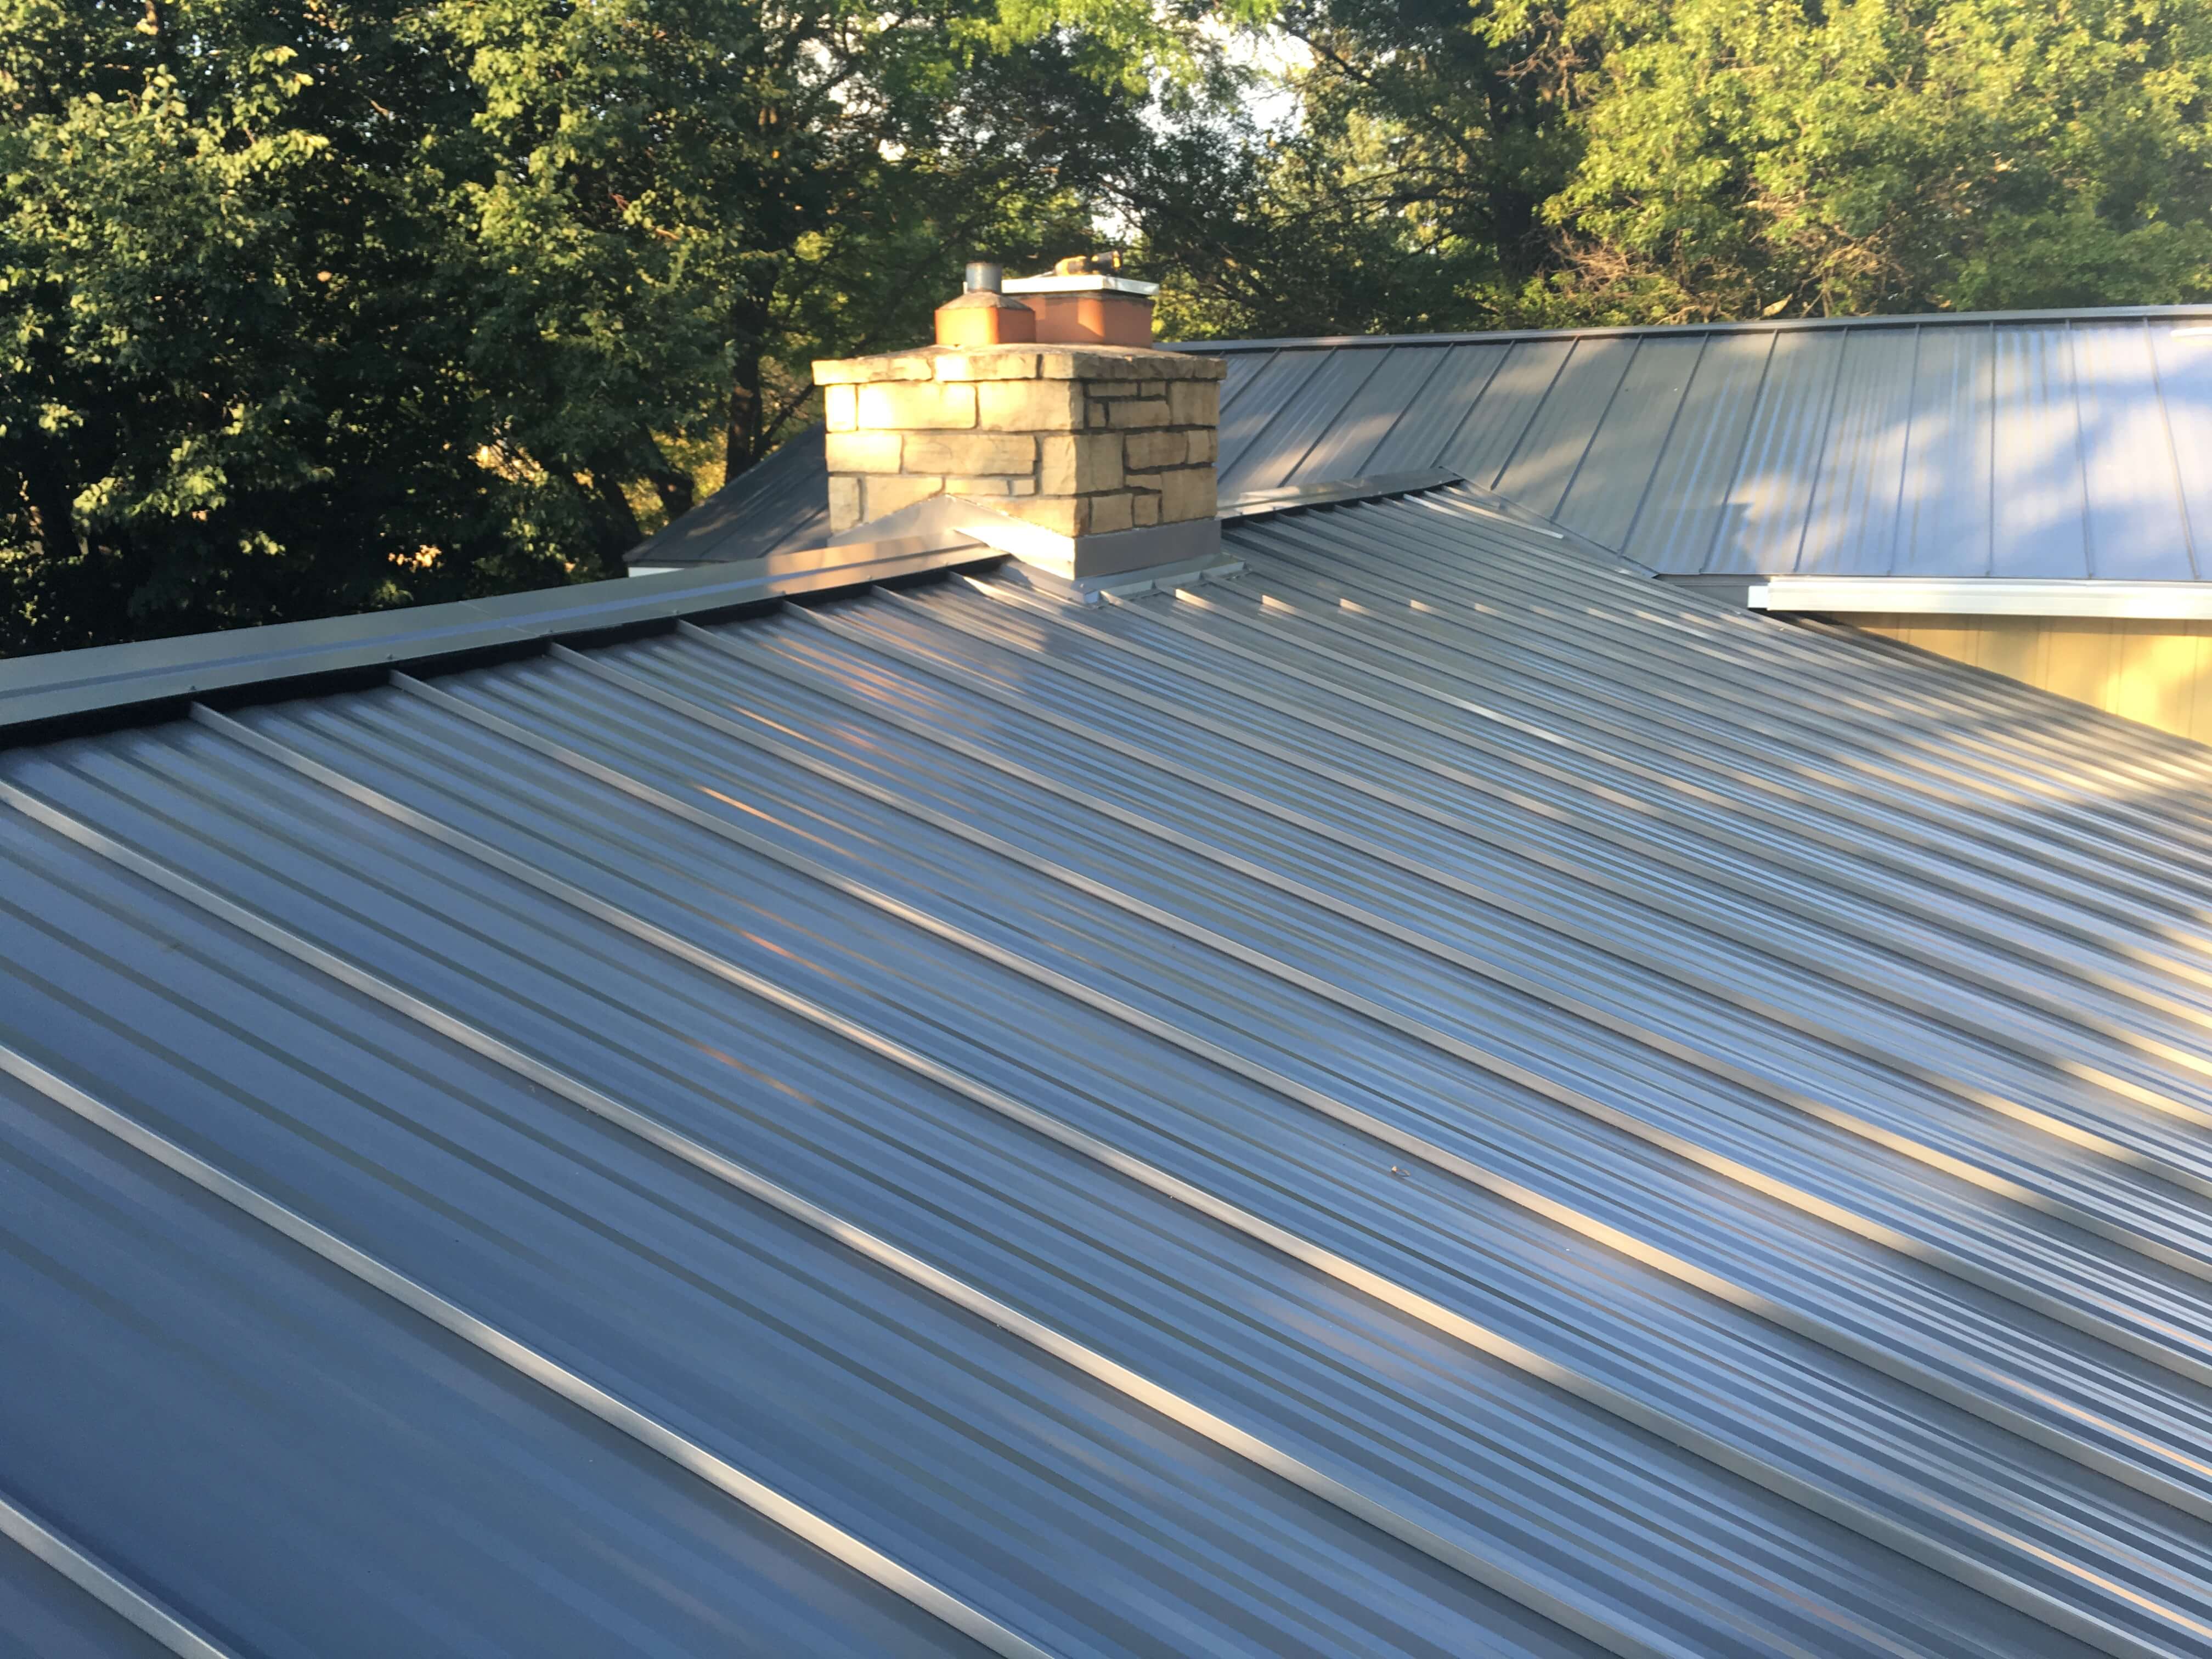 What Is A Standing Seam Metal Roof Images And Photos - vrogue.co